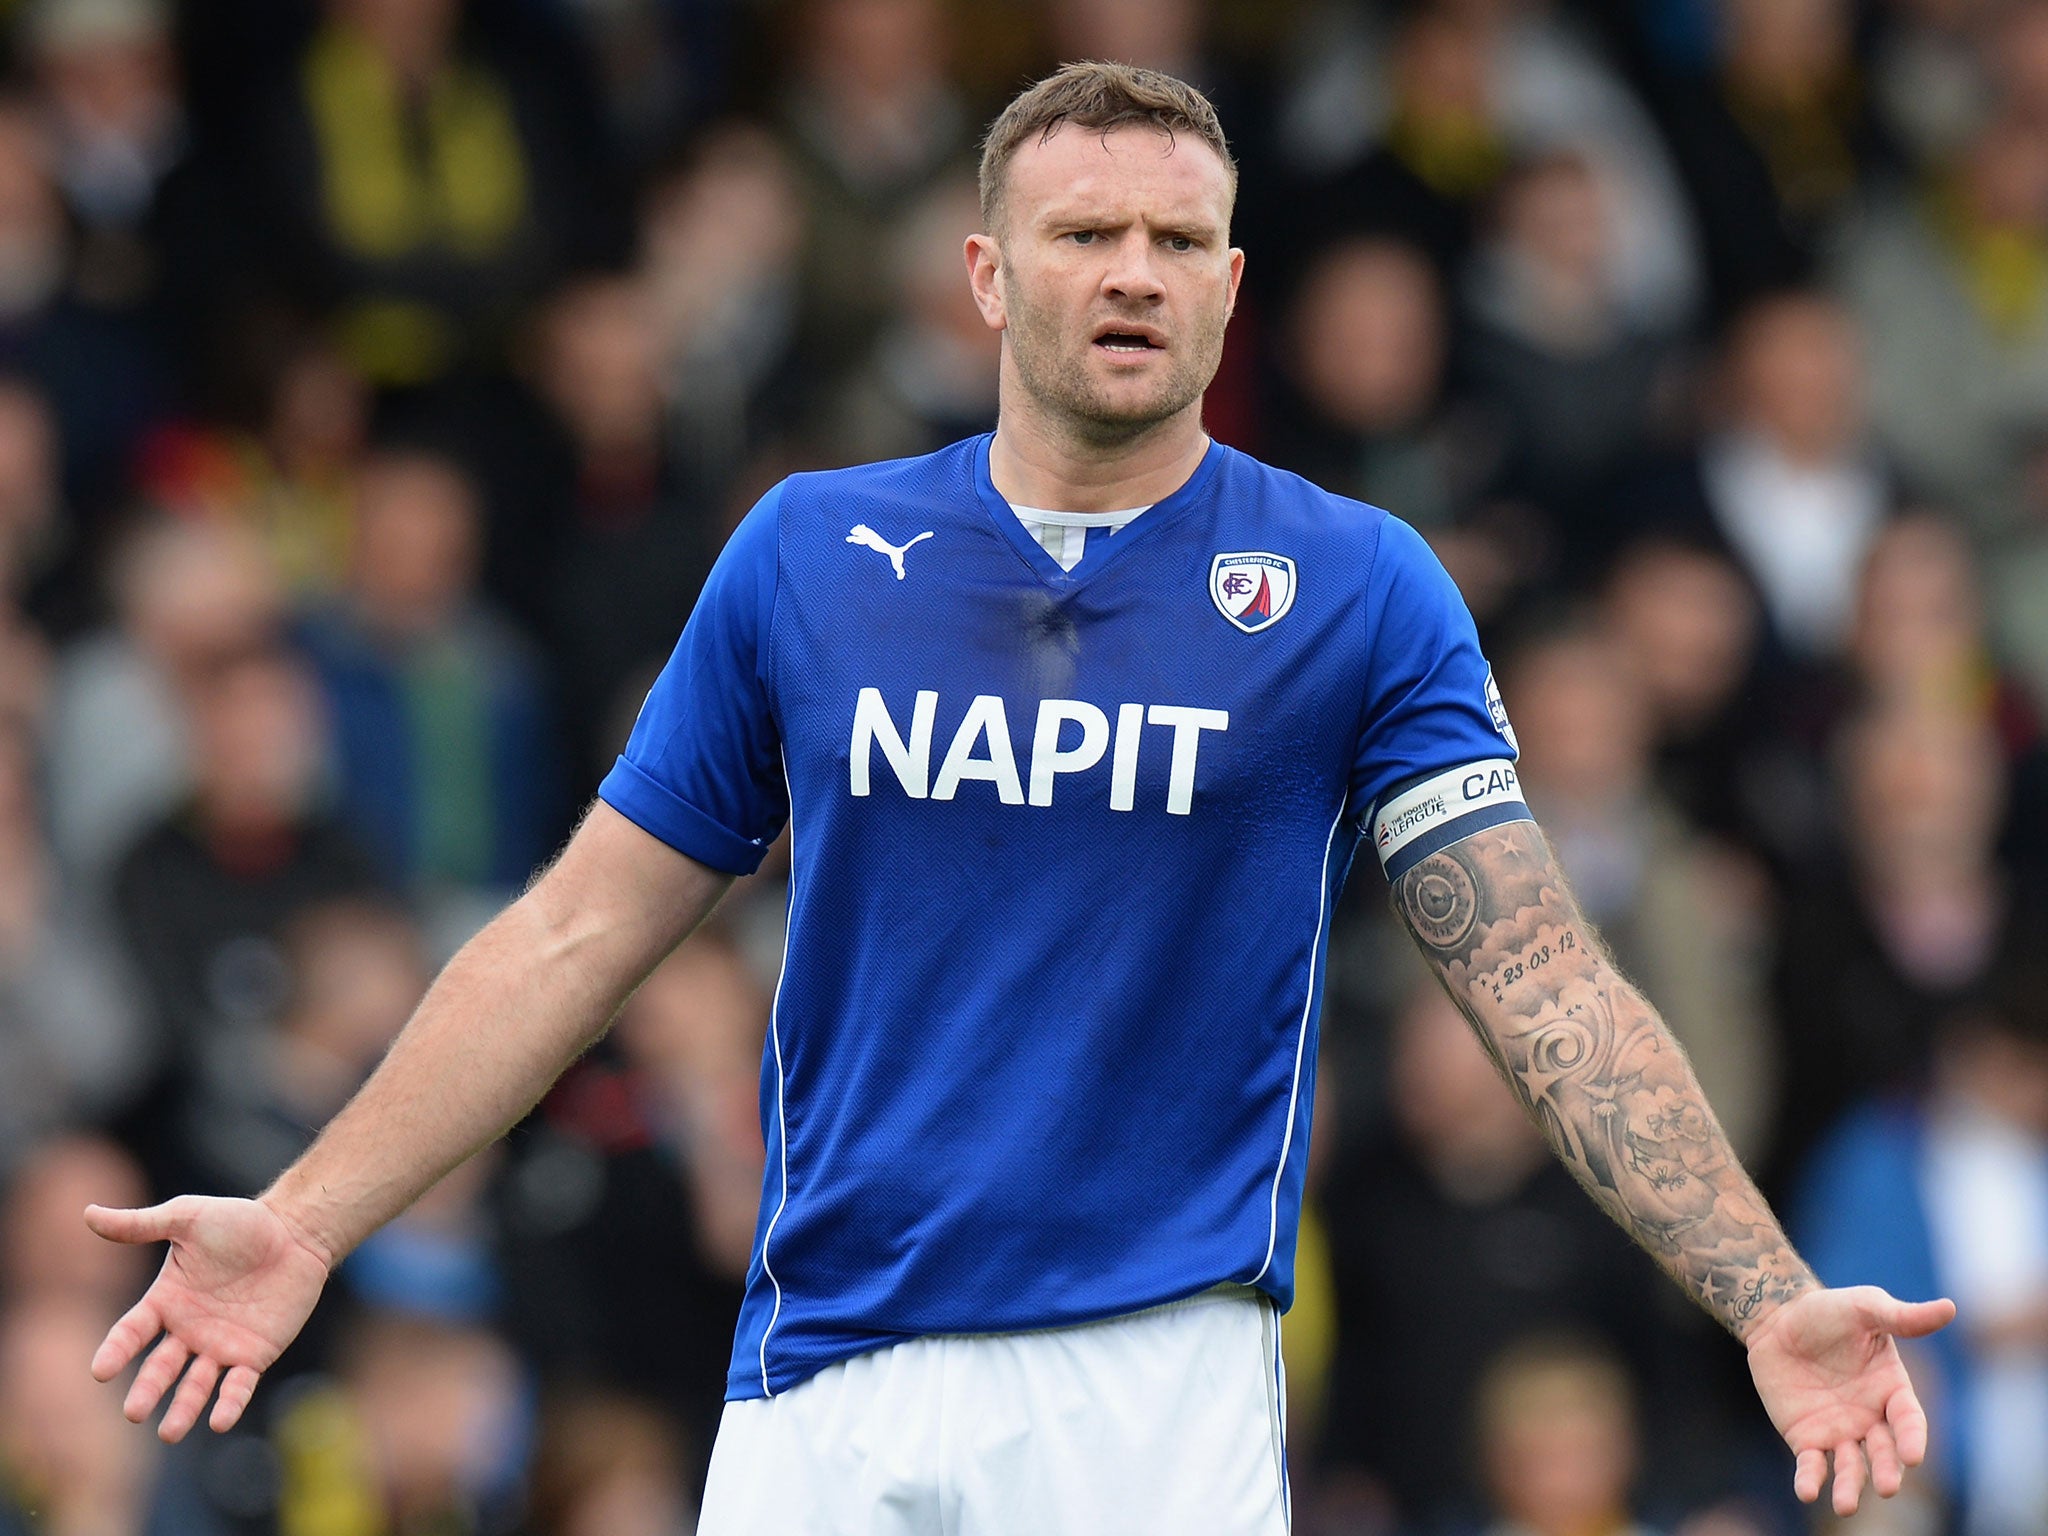 Ian Evatt has given a statement to police alleging he was punched, kicked and spat on